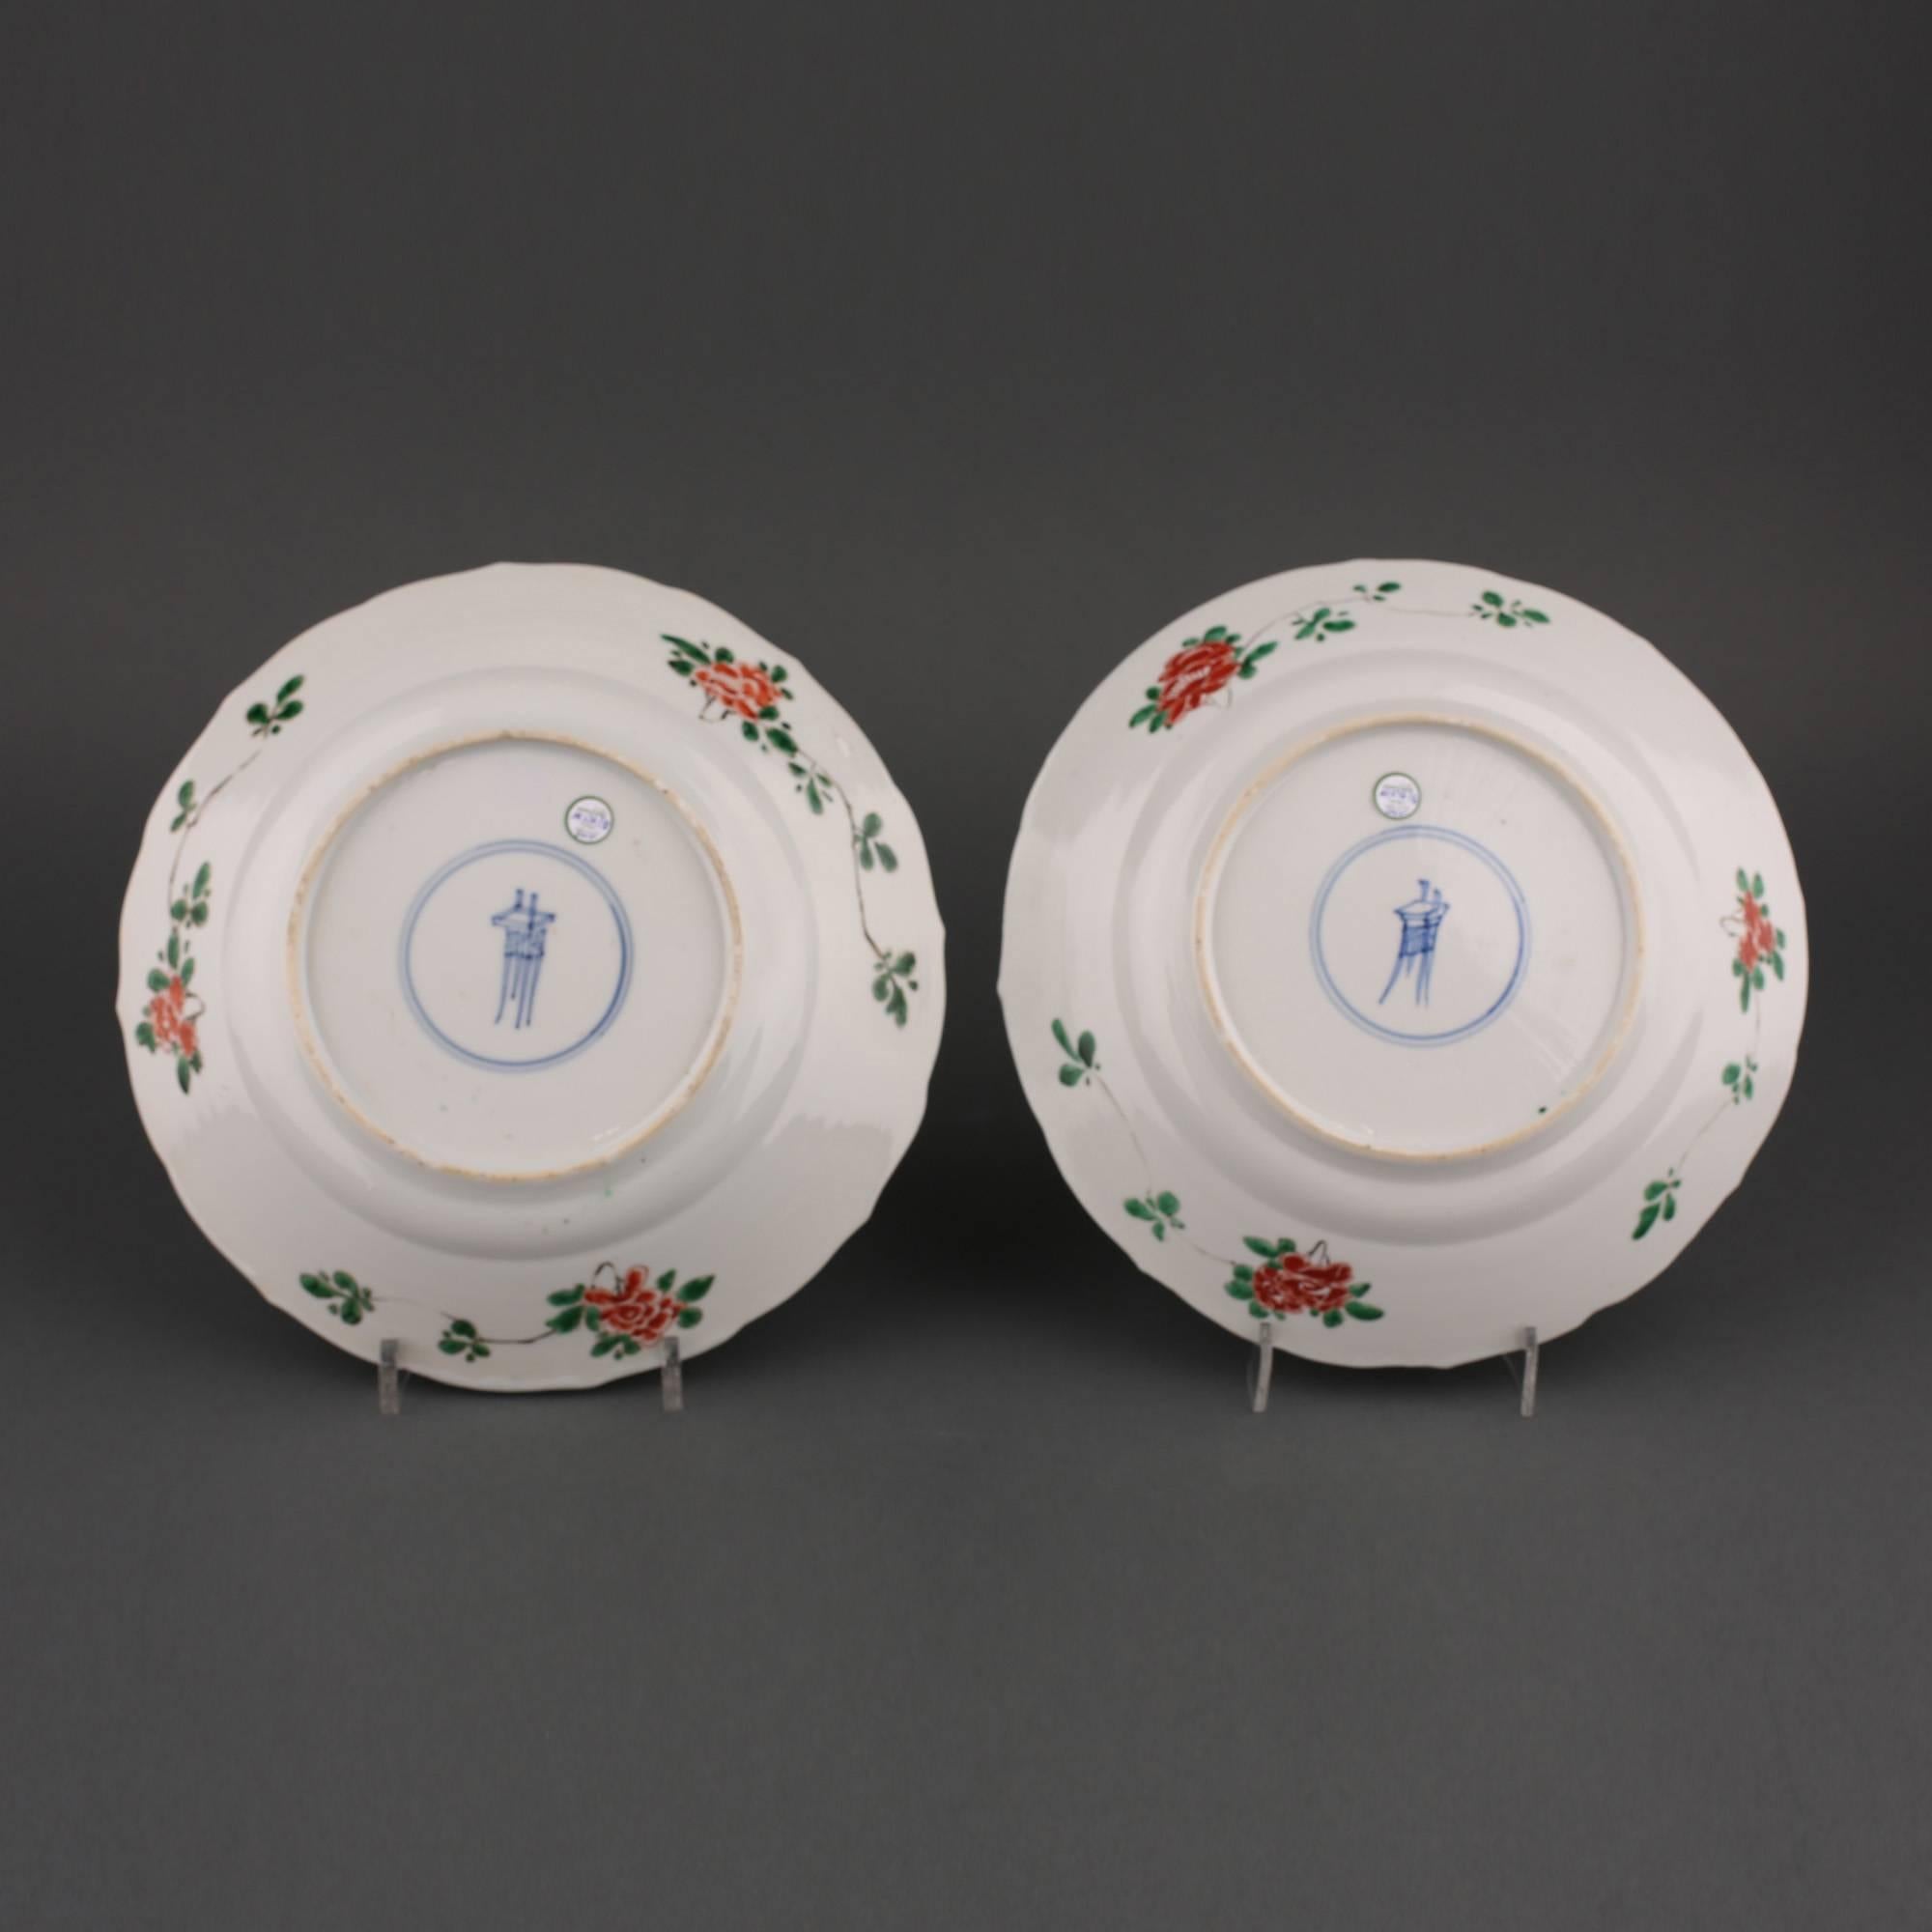 A pair of Chinese porcelain famille verte circular lobed rim plates, the centre painted with peonies and pomegranate plants emerging from rockwork, butterfly and insects above, all within a six-panelled border of flowering plants on various diaper